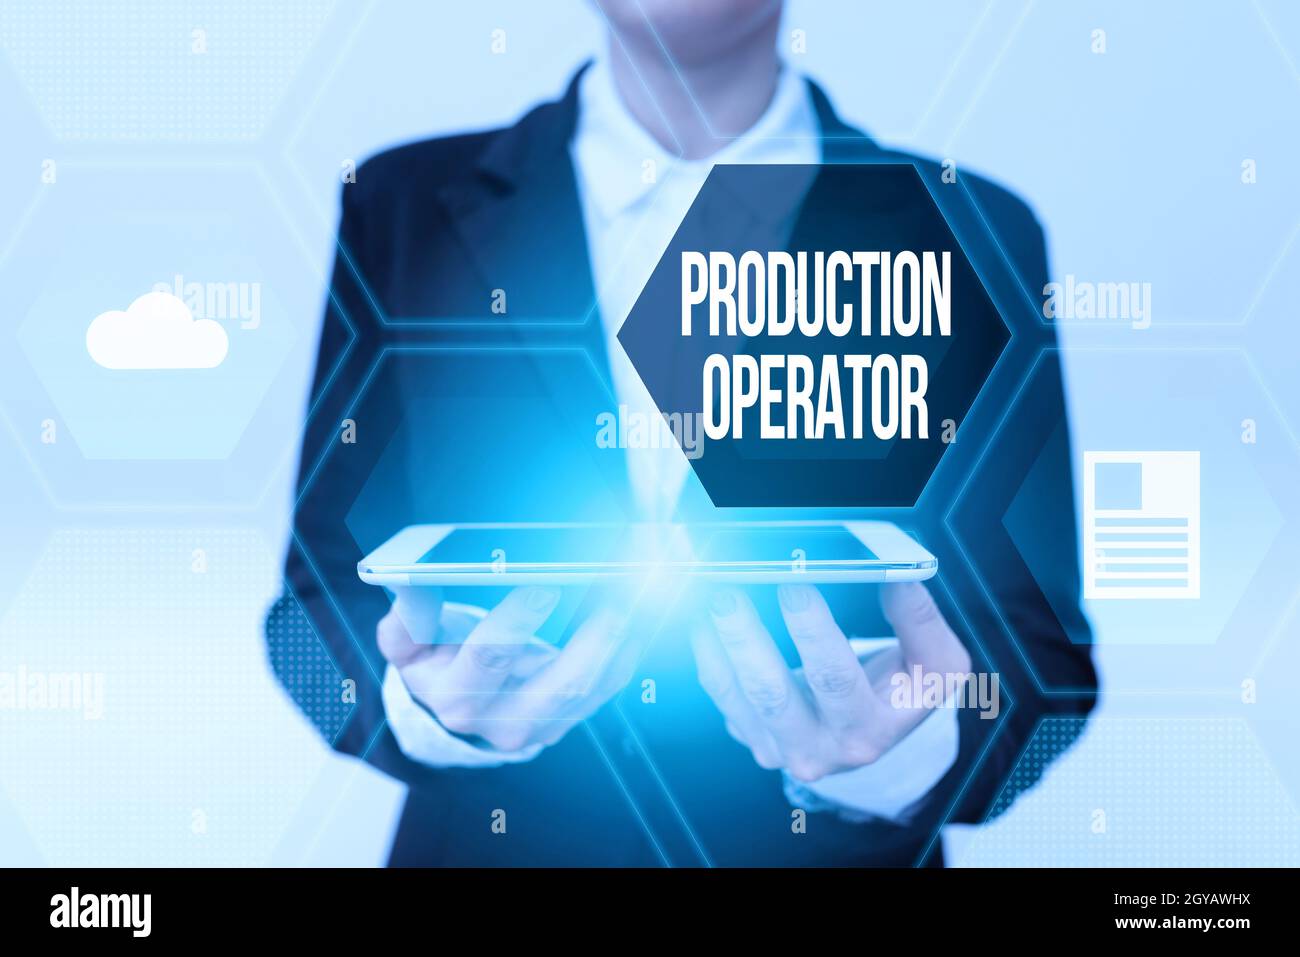 Writing displaying text Production Operator, Business showcase control equipment used in the manufacturing process Lady In Uniform Holding Phone And S Stock Photo